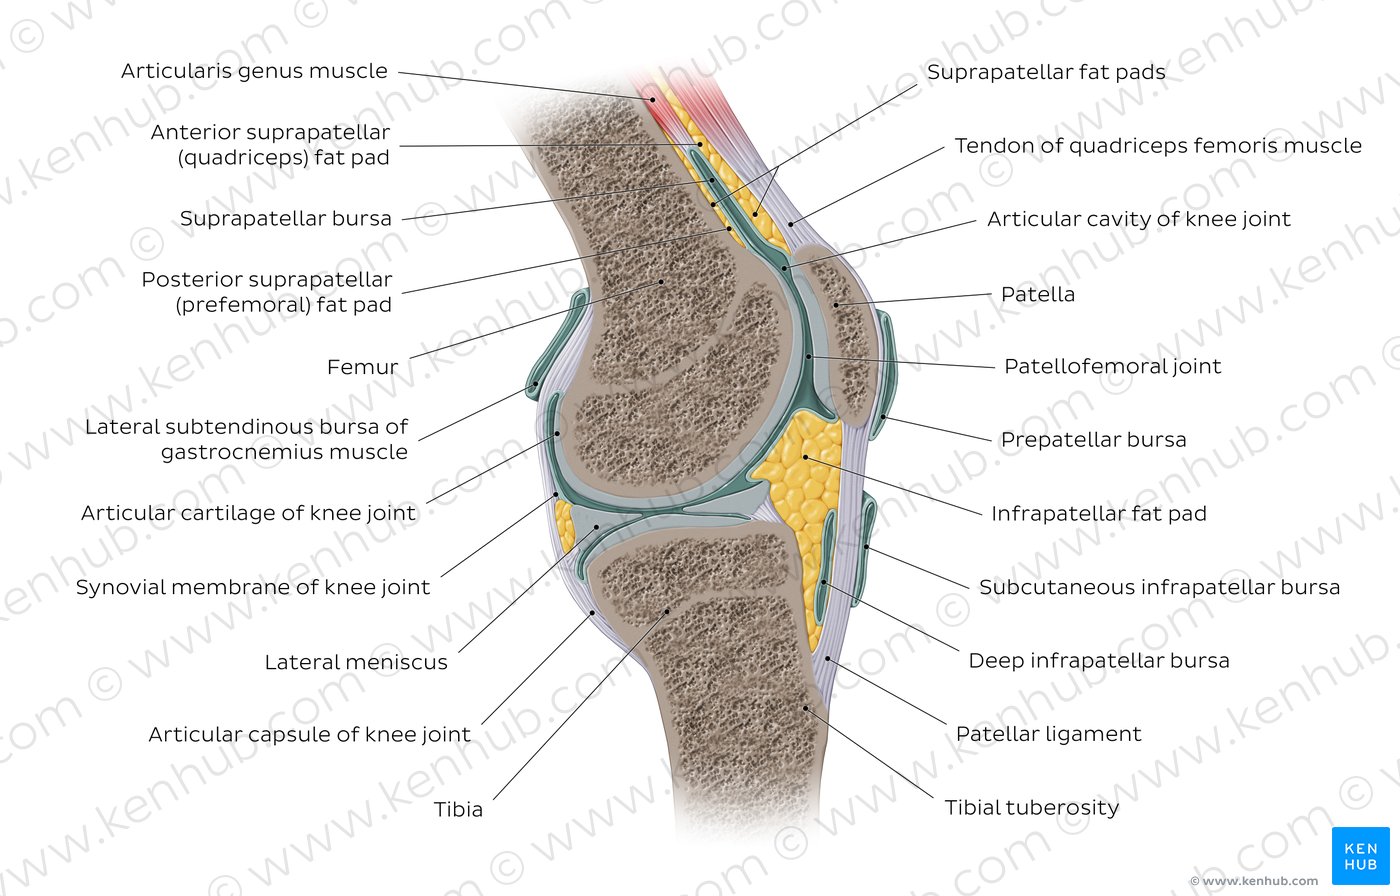 Knee joint: anatomy, ligaments and movements | Kenhub